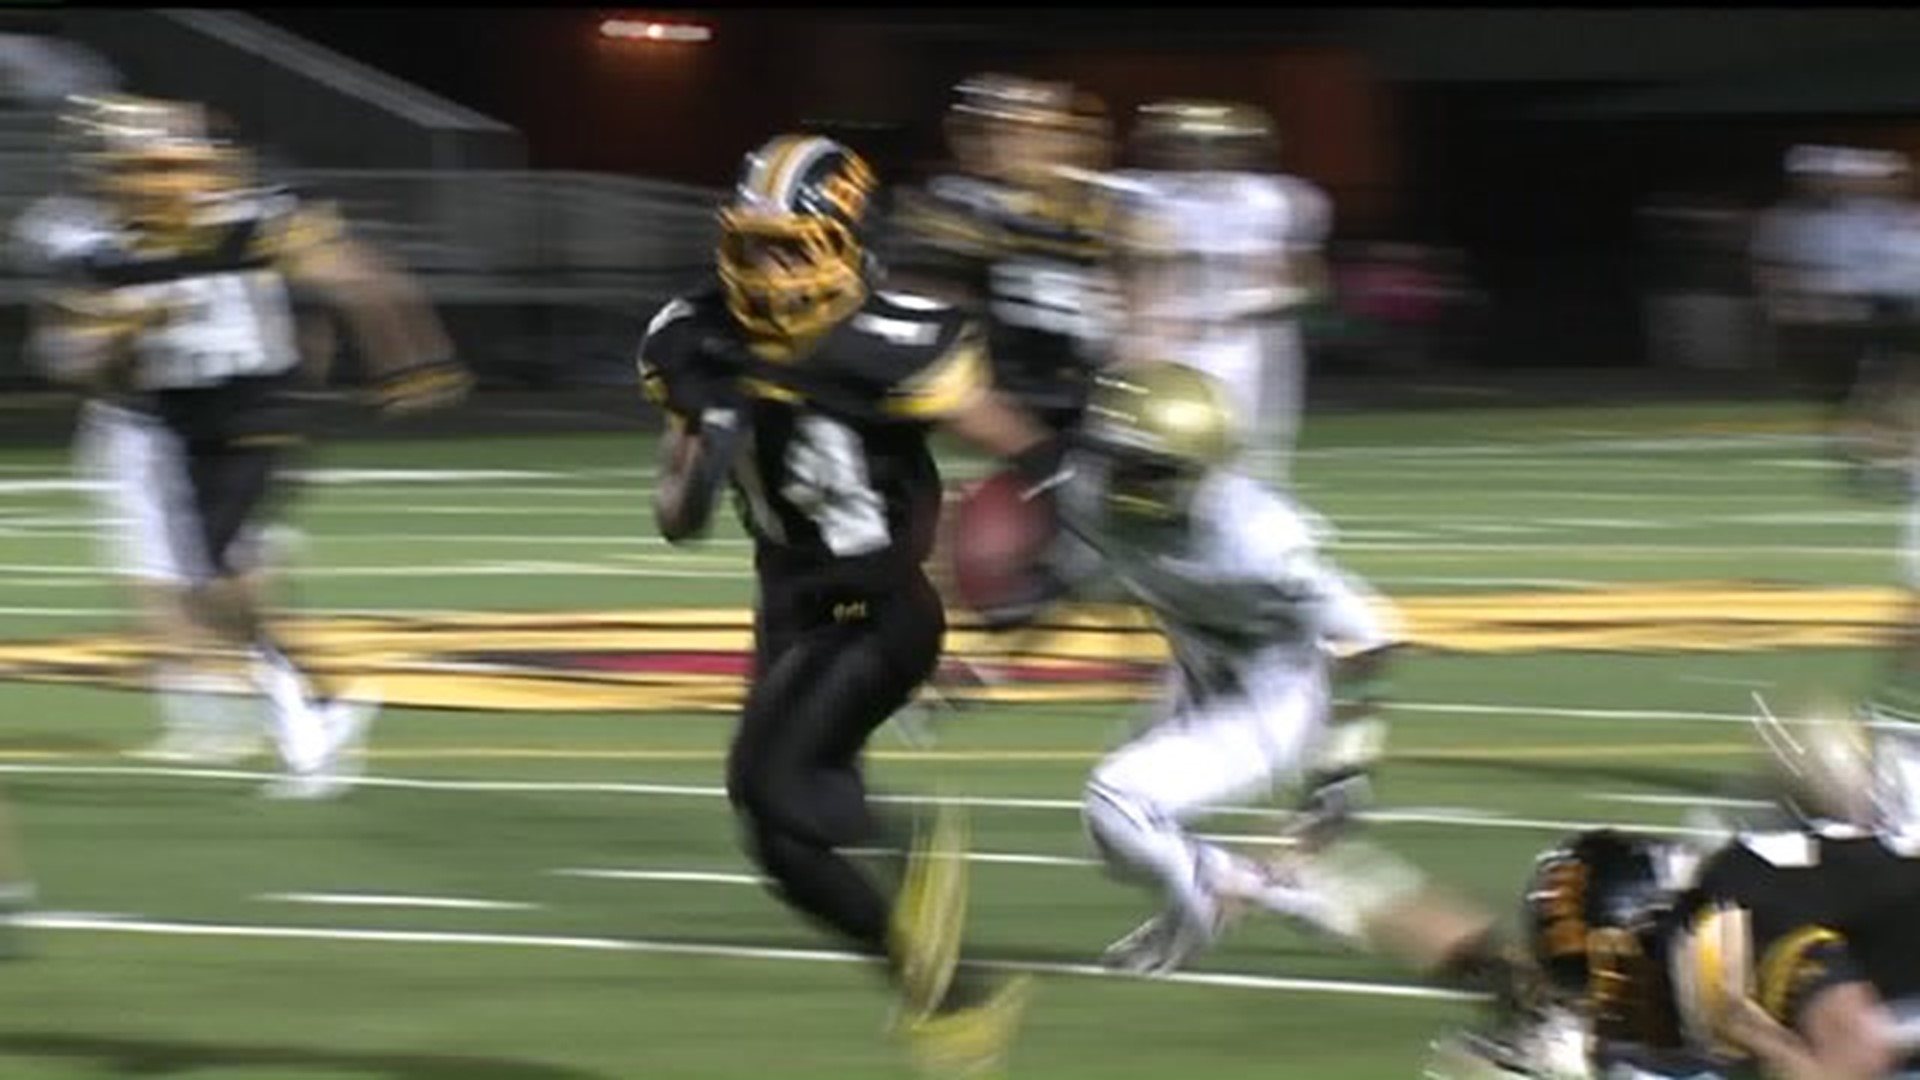 3rd quarter explosion leads Bettendorf to Round 2 win